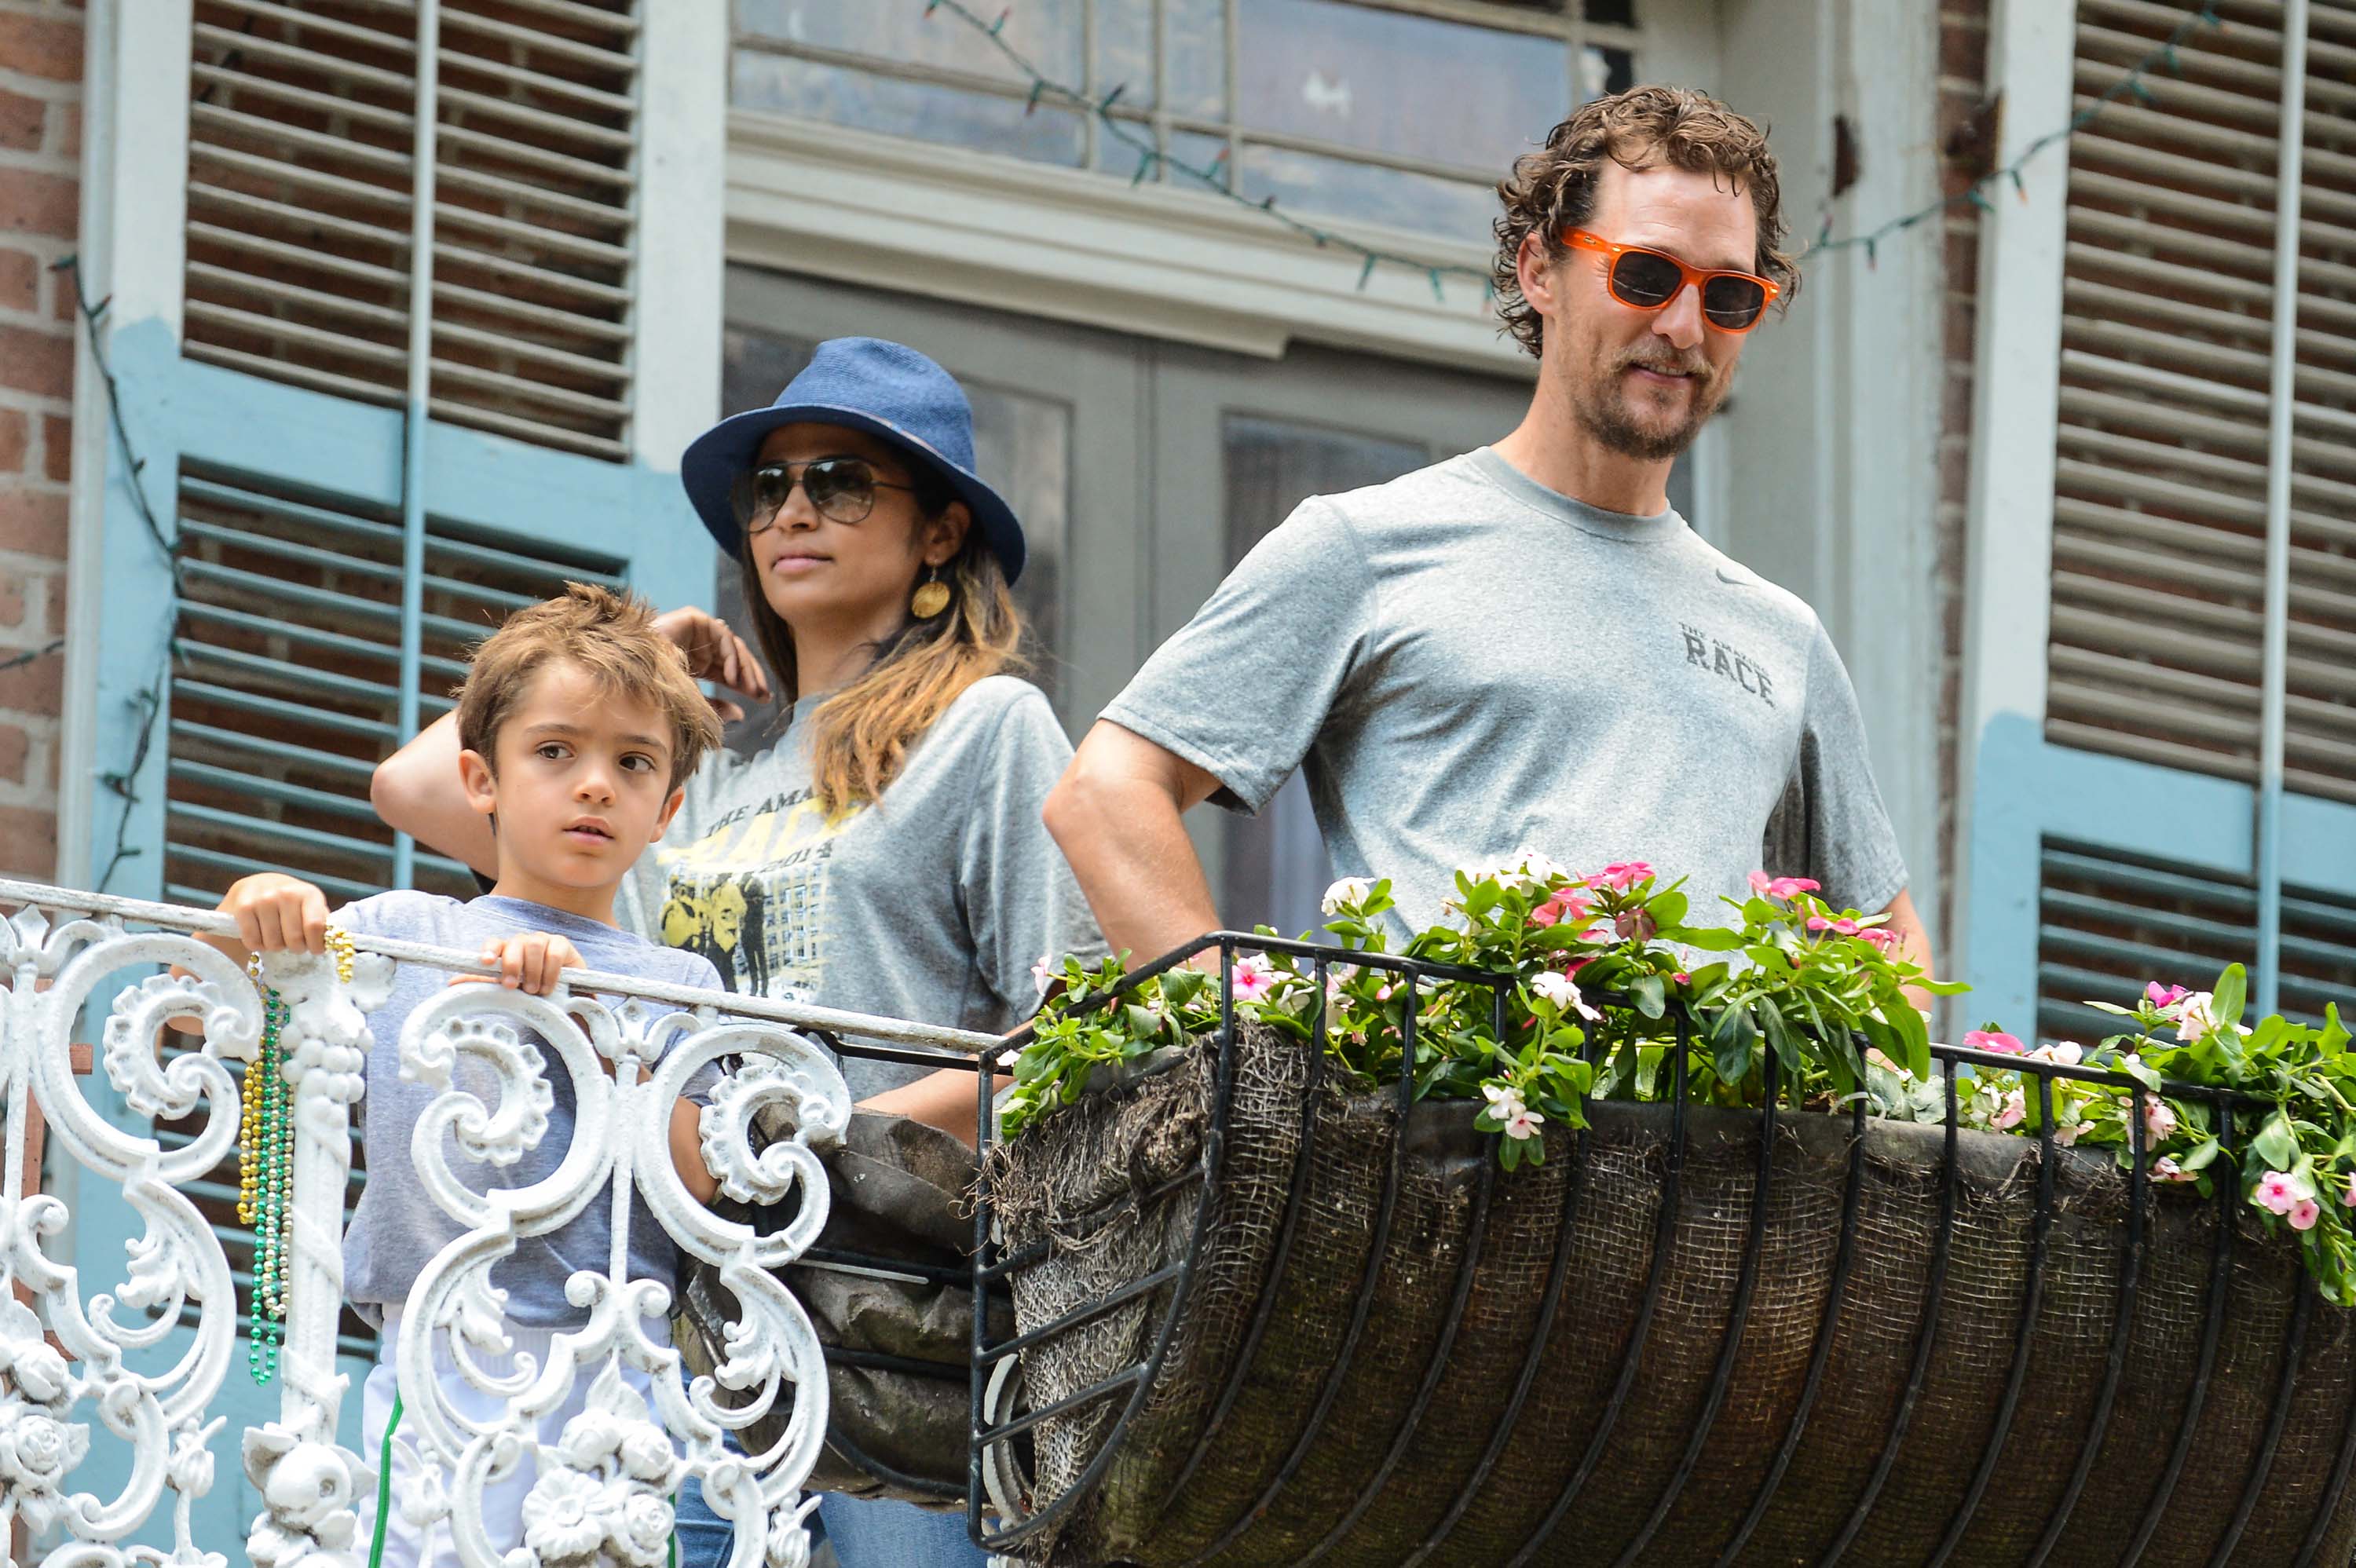 Levi McConaughey, Camila Alves, and Matthew McConaughey participate in a charity Amazing Race Scavenger Hunt in New Orleans, Louisiana, on May 17, 2014. | Source: Getty Imags